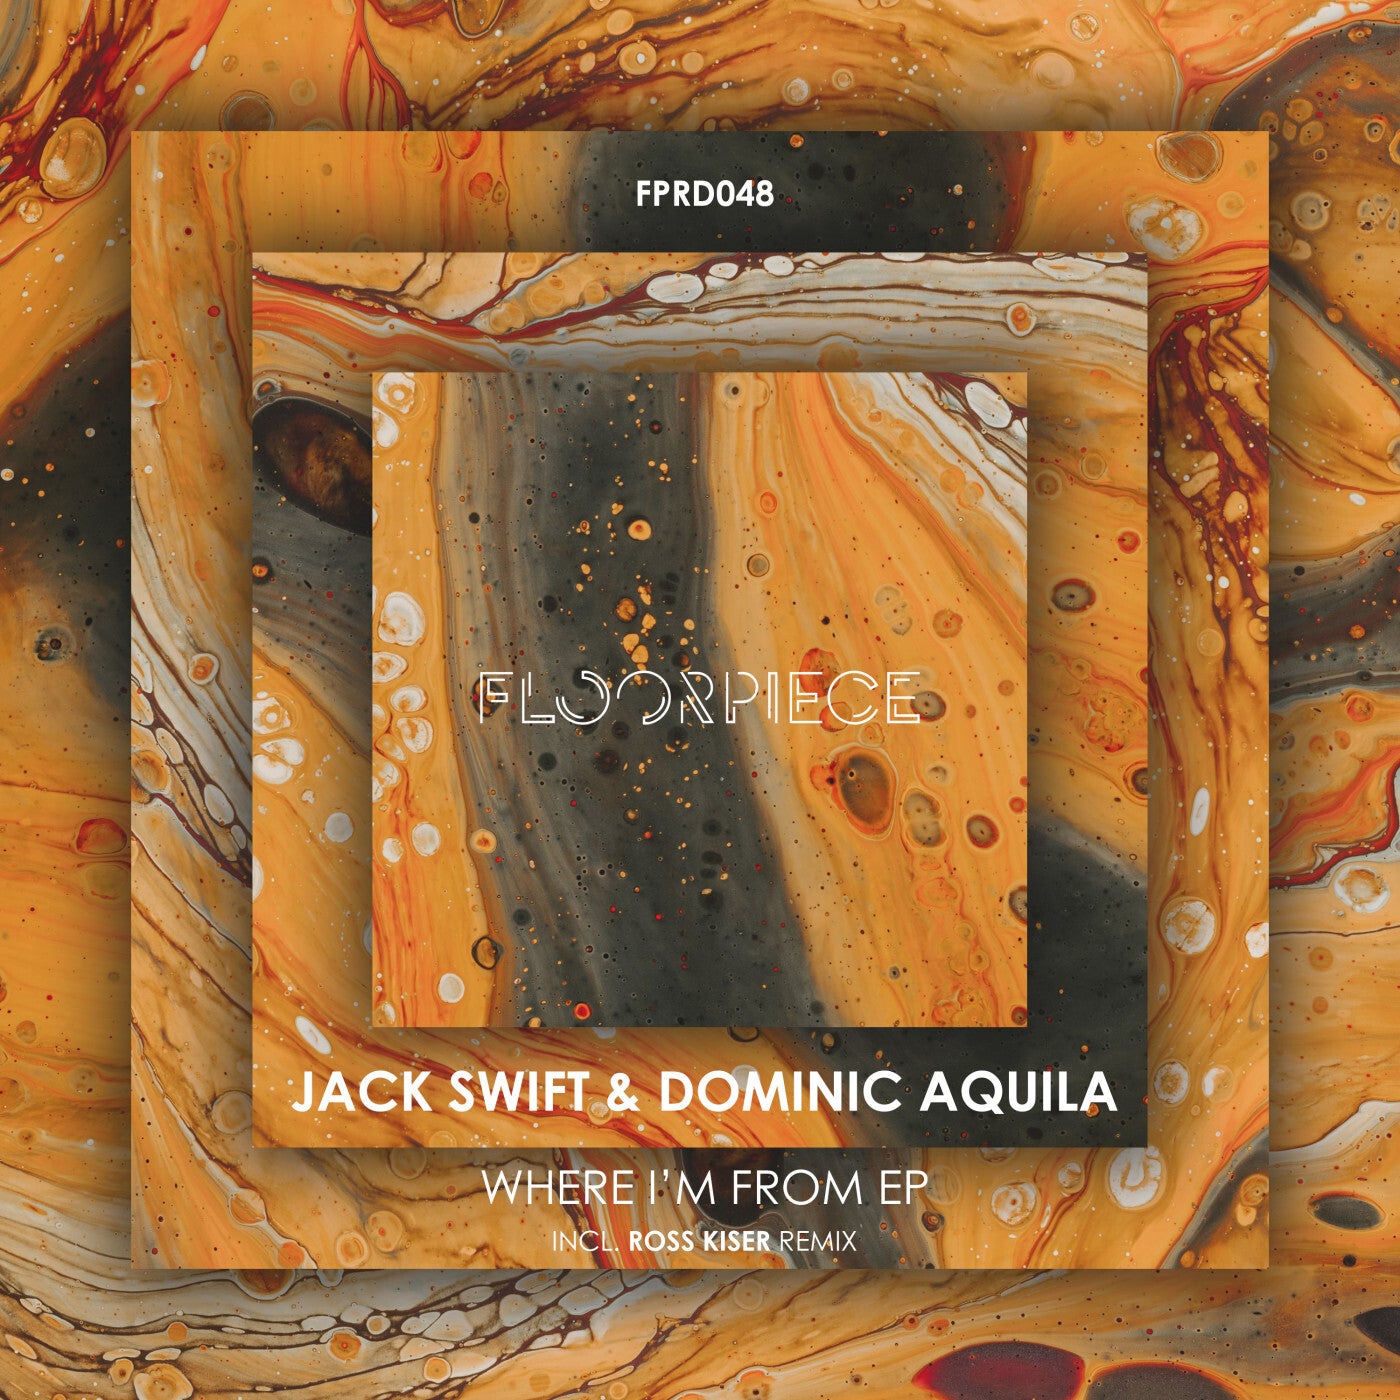 Jack Swift, Dominic Aquila – Where I’m From EP [FPRD048]